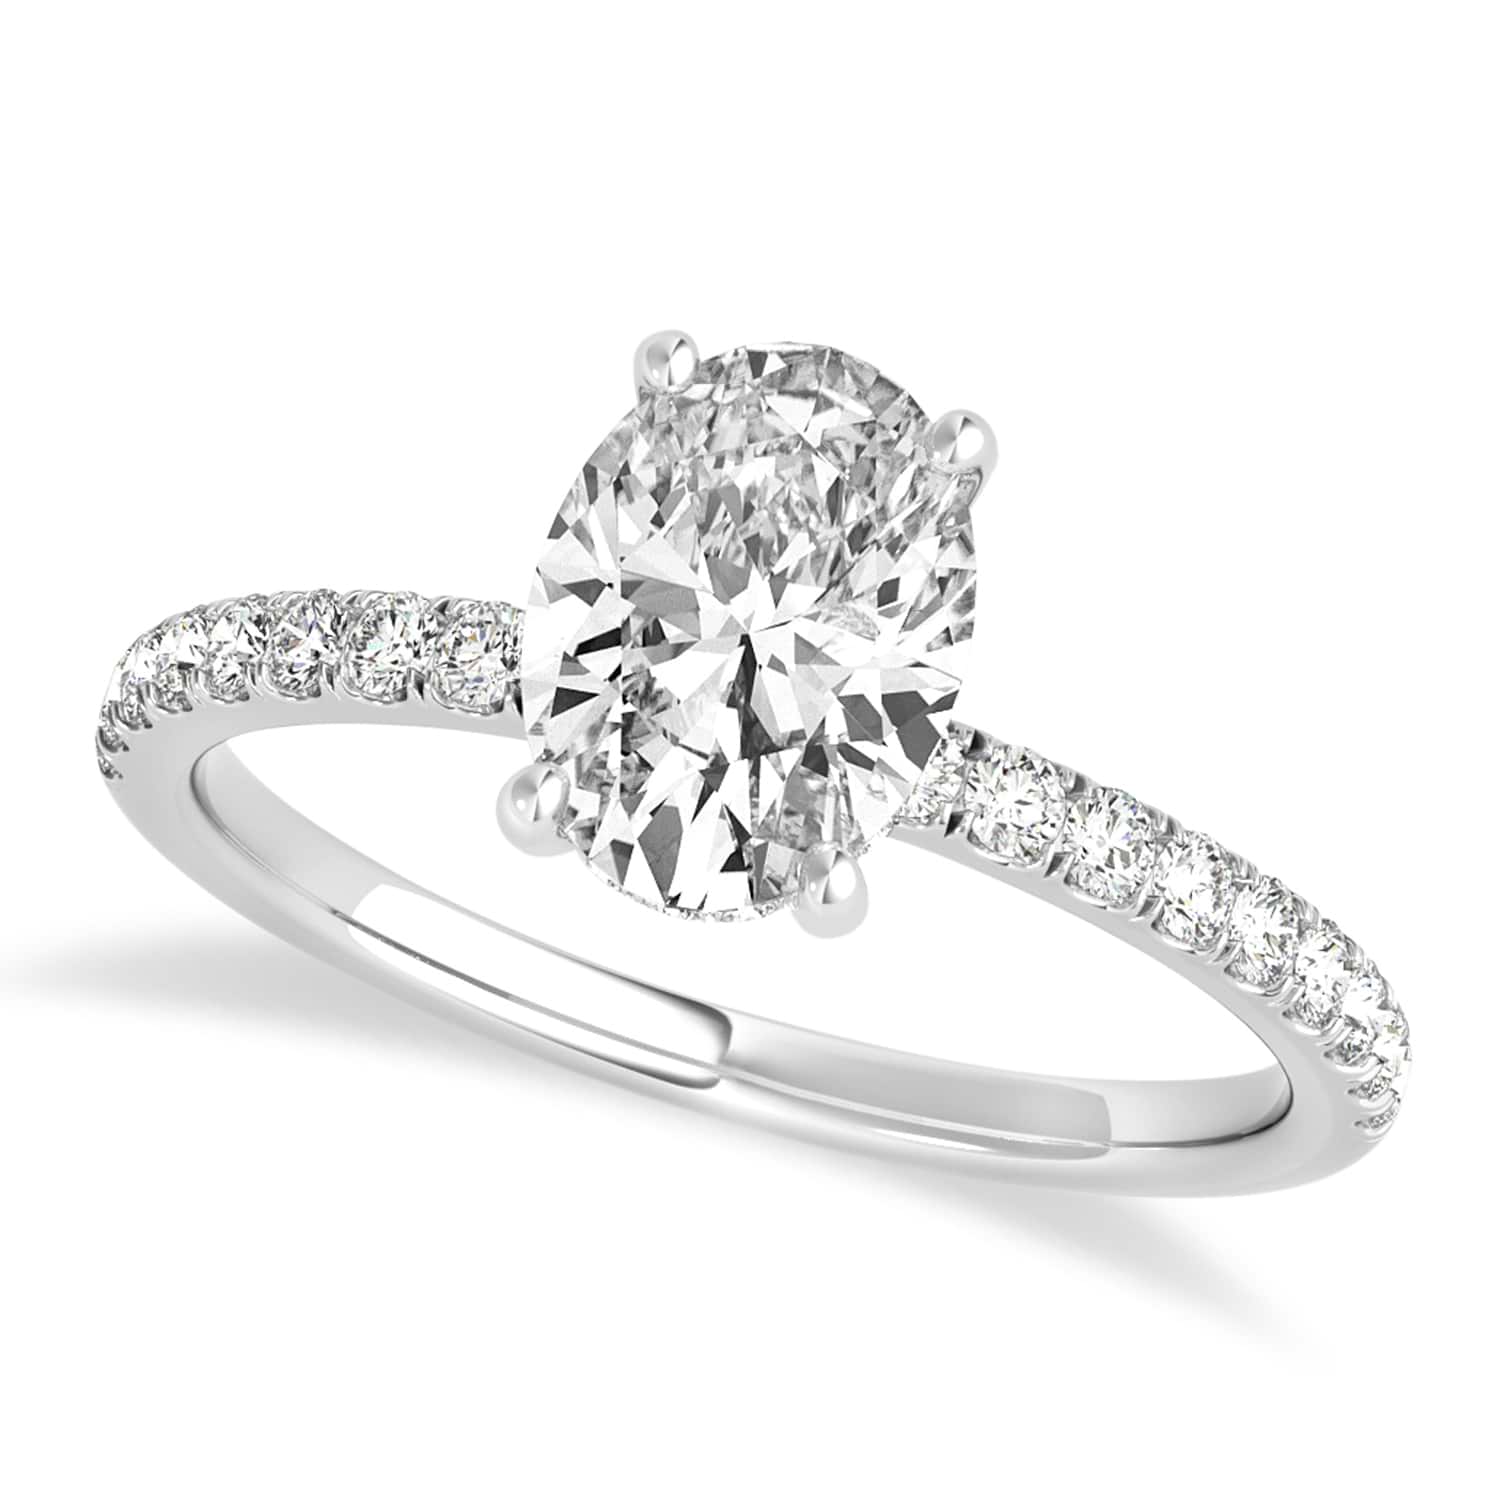 Oval Lab Grown Diamond Single Row Hidden Halo Engagement Ring 18k White Gold (1.00ct)